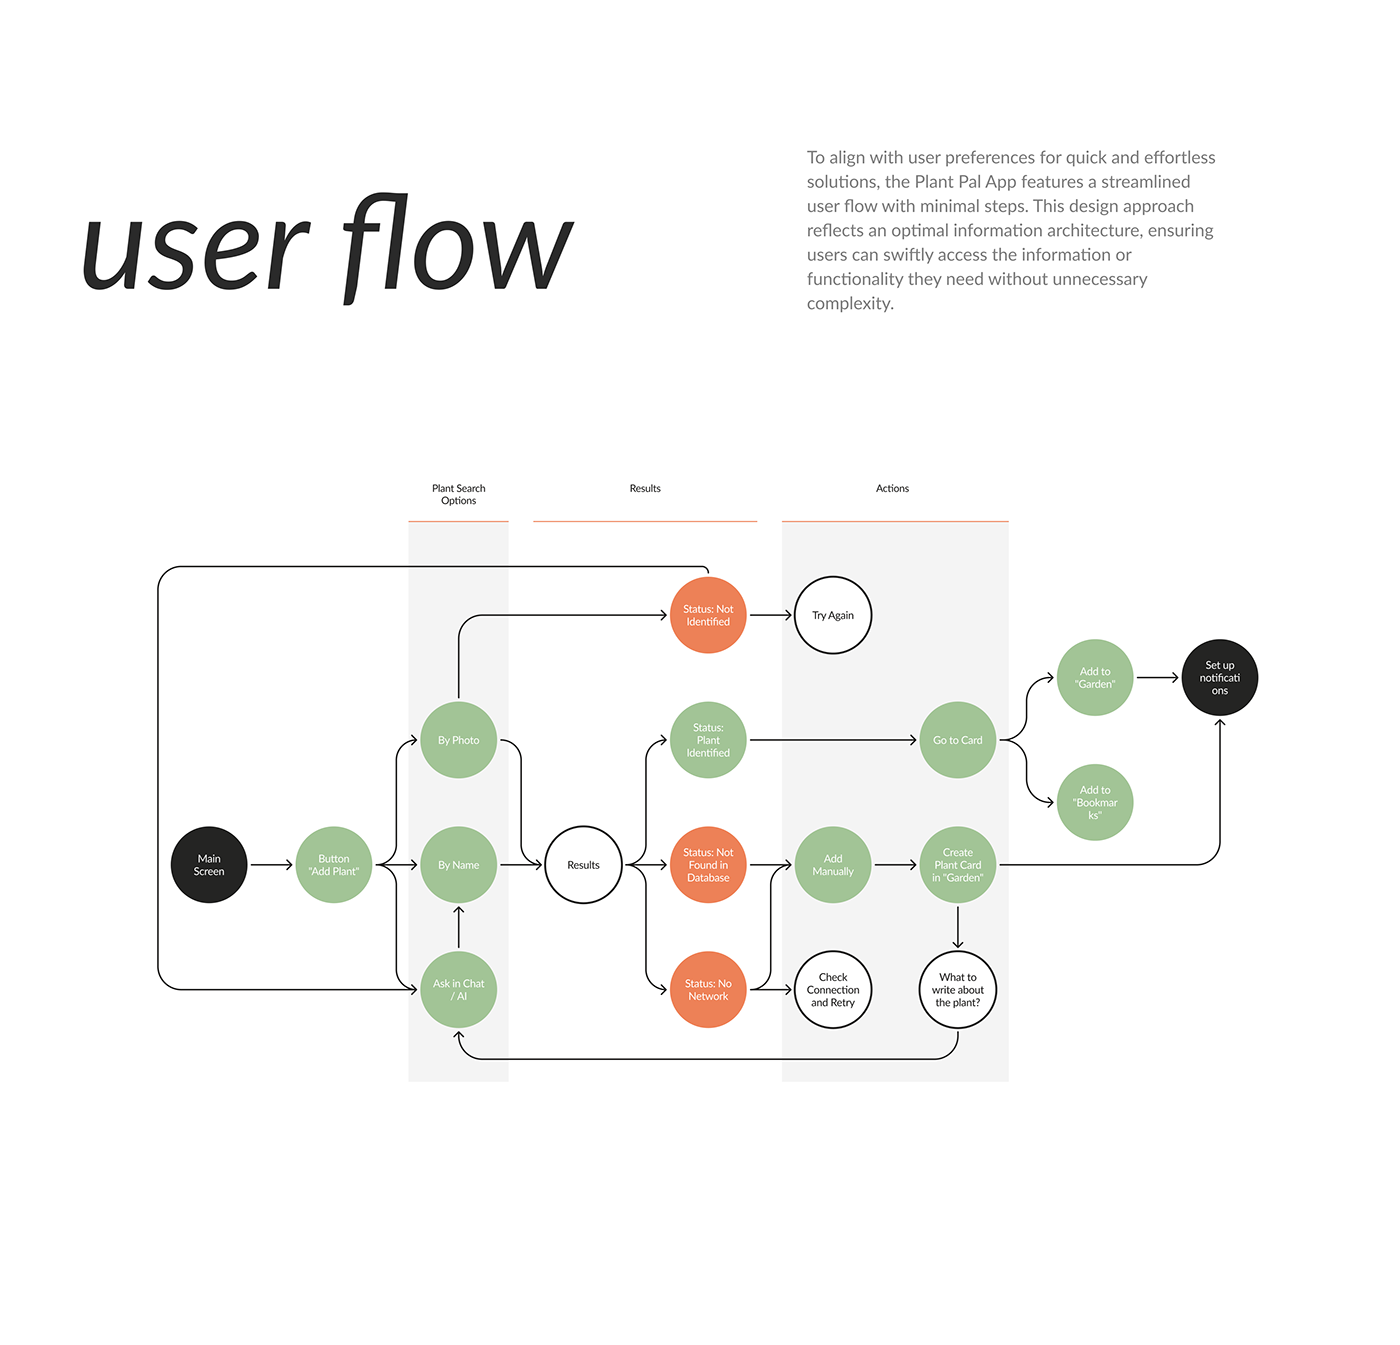 App features a streamlined user flow with minimal steps